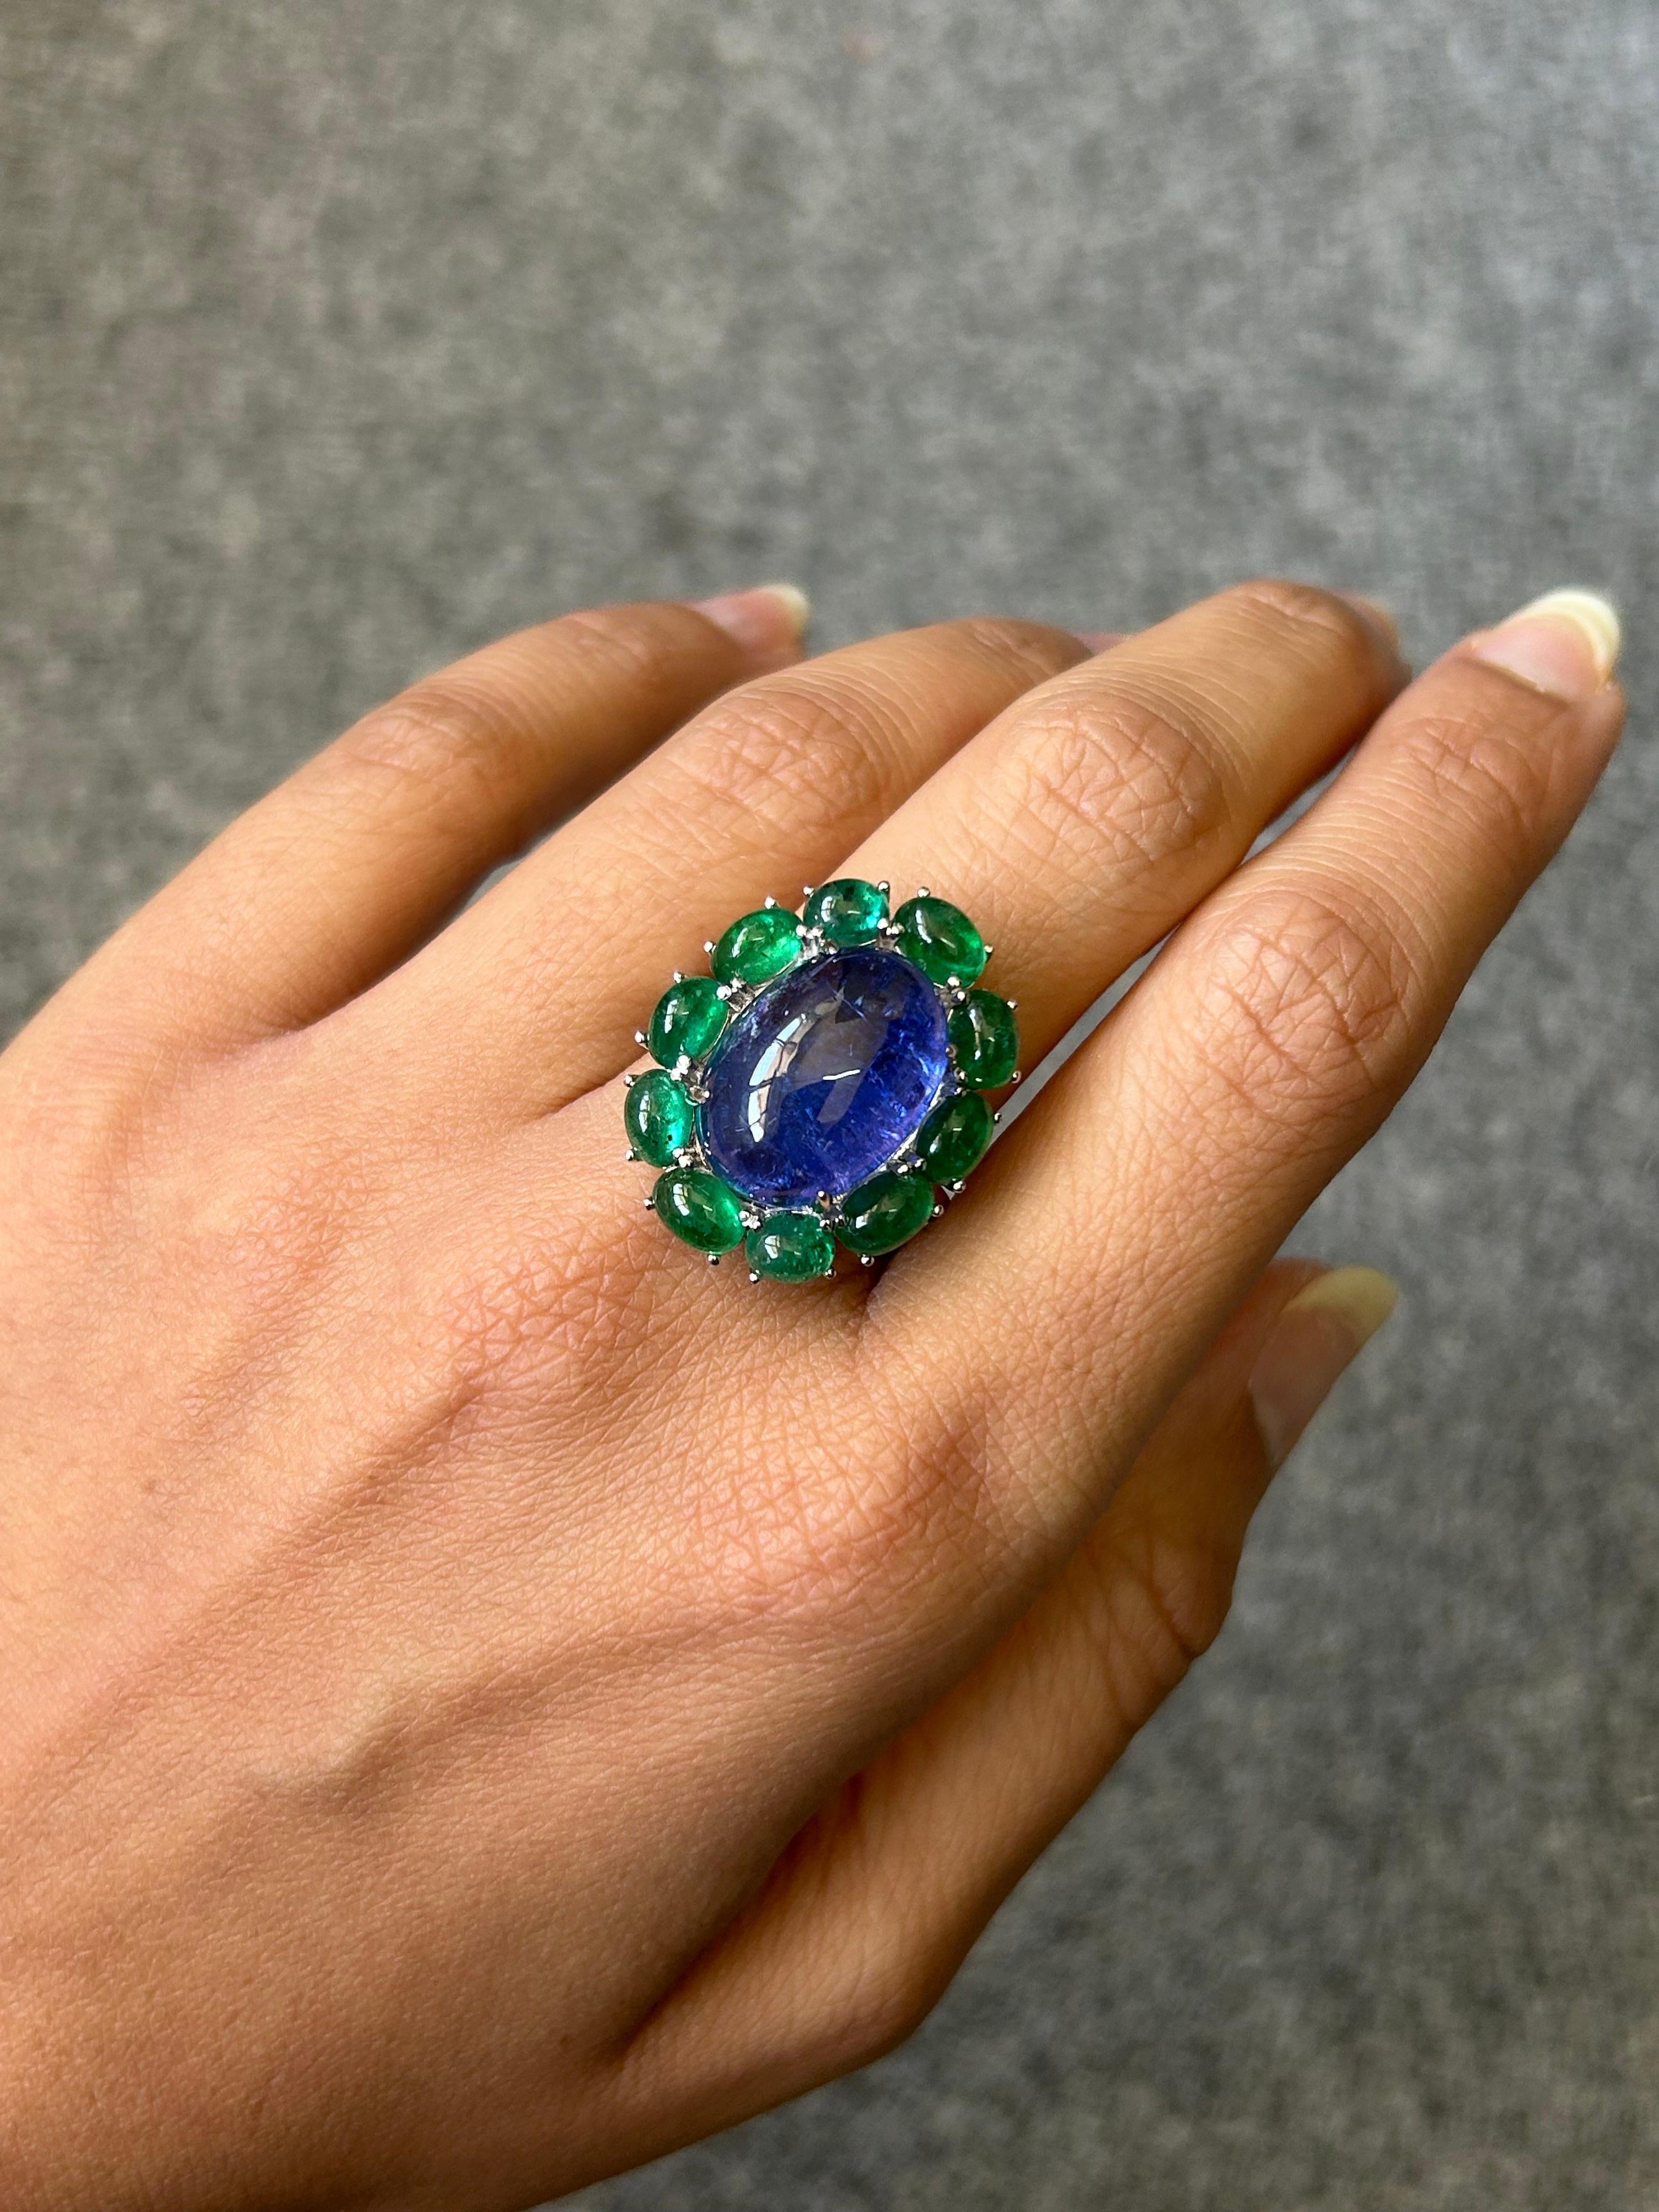 A beautiful 15.82 carat cabochon shaped natural Tanzanite cocktail ring, with 5.29 carat cabochon Emerald surrounding it. The ring is made in solid 18K White Gold. The center stone Tanzanite has a beautiful blue hue, and surrounding green Emeralds